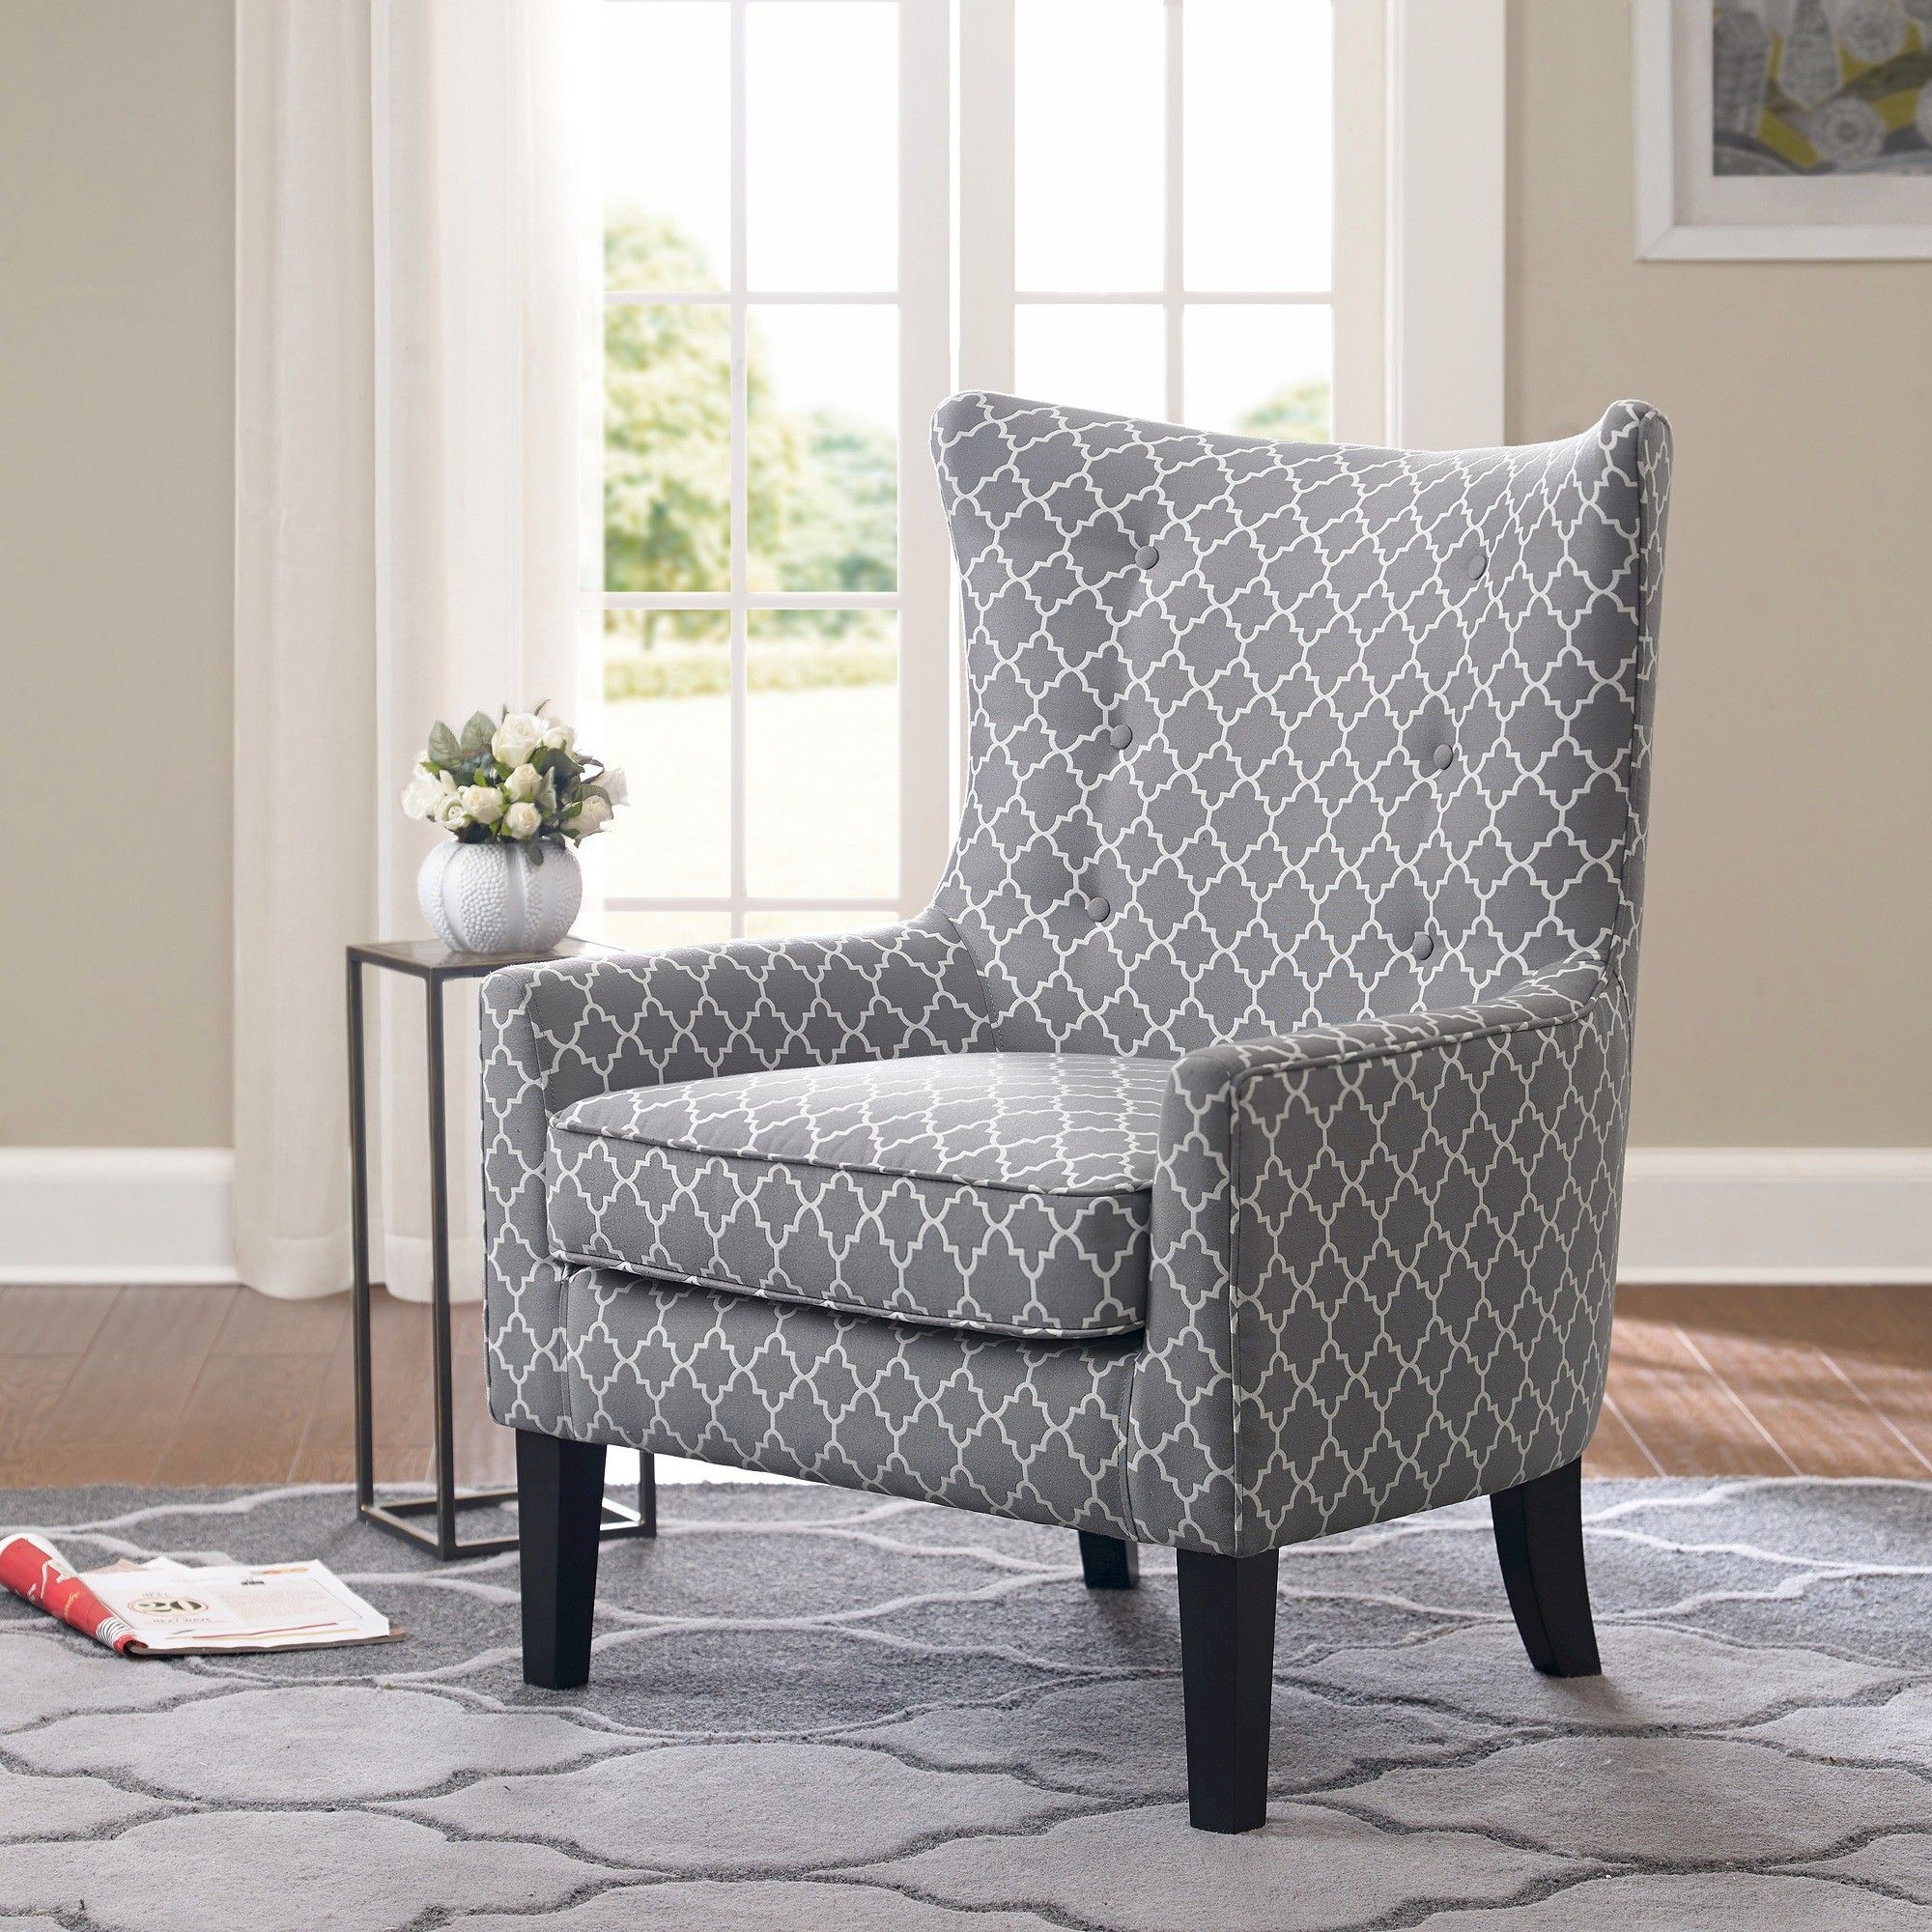 Madison Park Carissa Shelter Wing Chair - Multi - 29.92W x 30.71D x 42.13H"